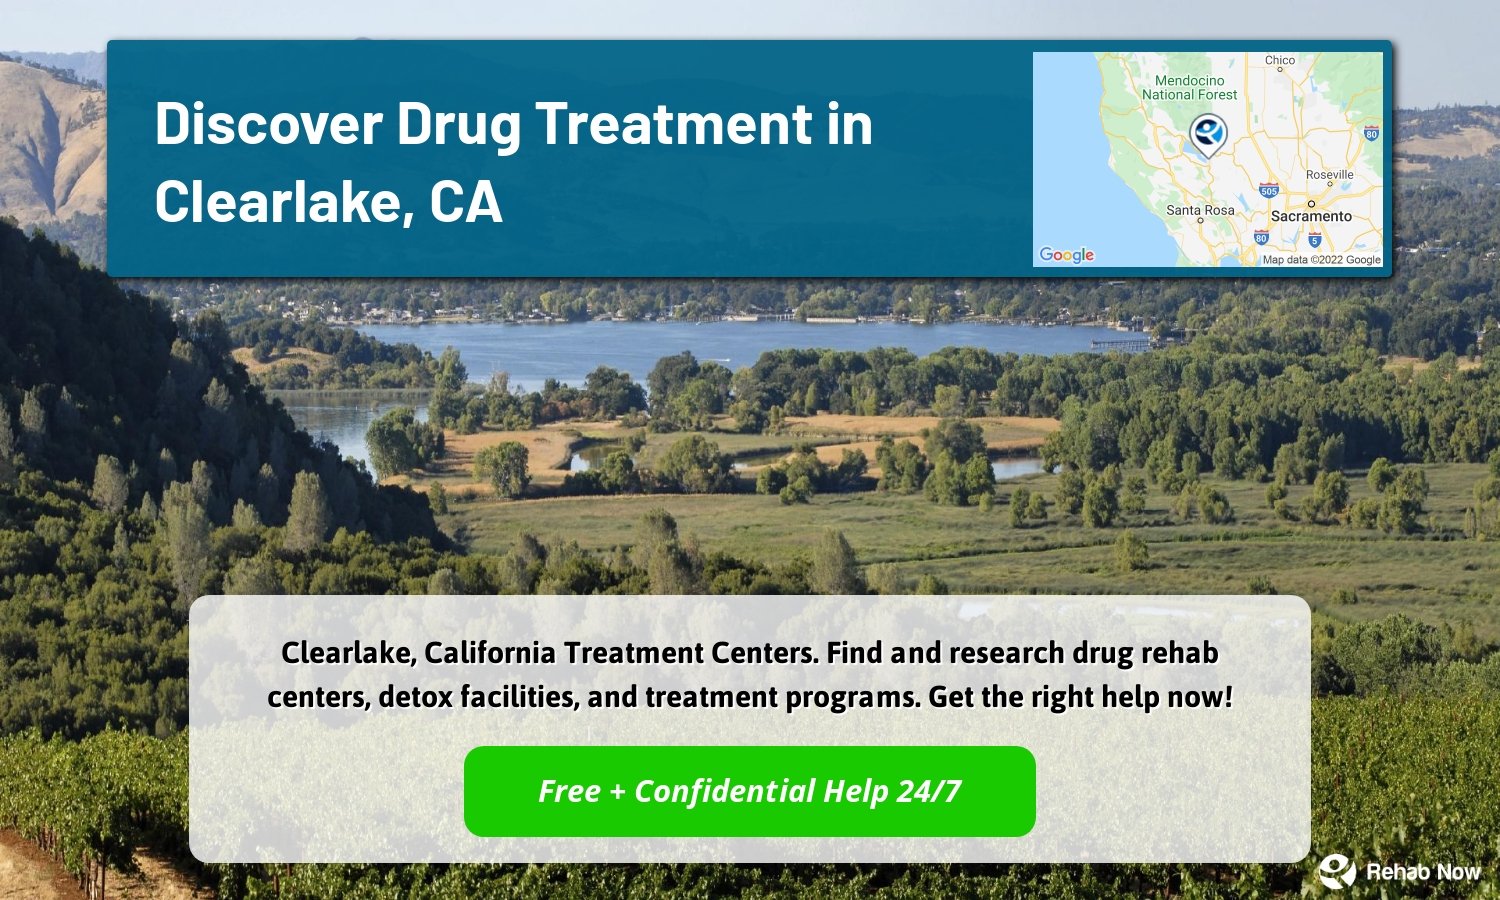 Clearlake, California Treatment Centers. Find and research drug rehab centers, detox facilities, and treatment programs. Get the right help now!